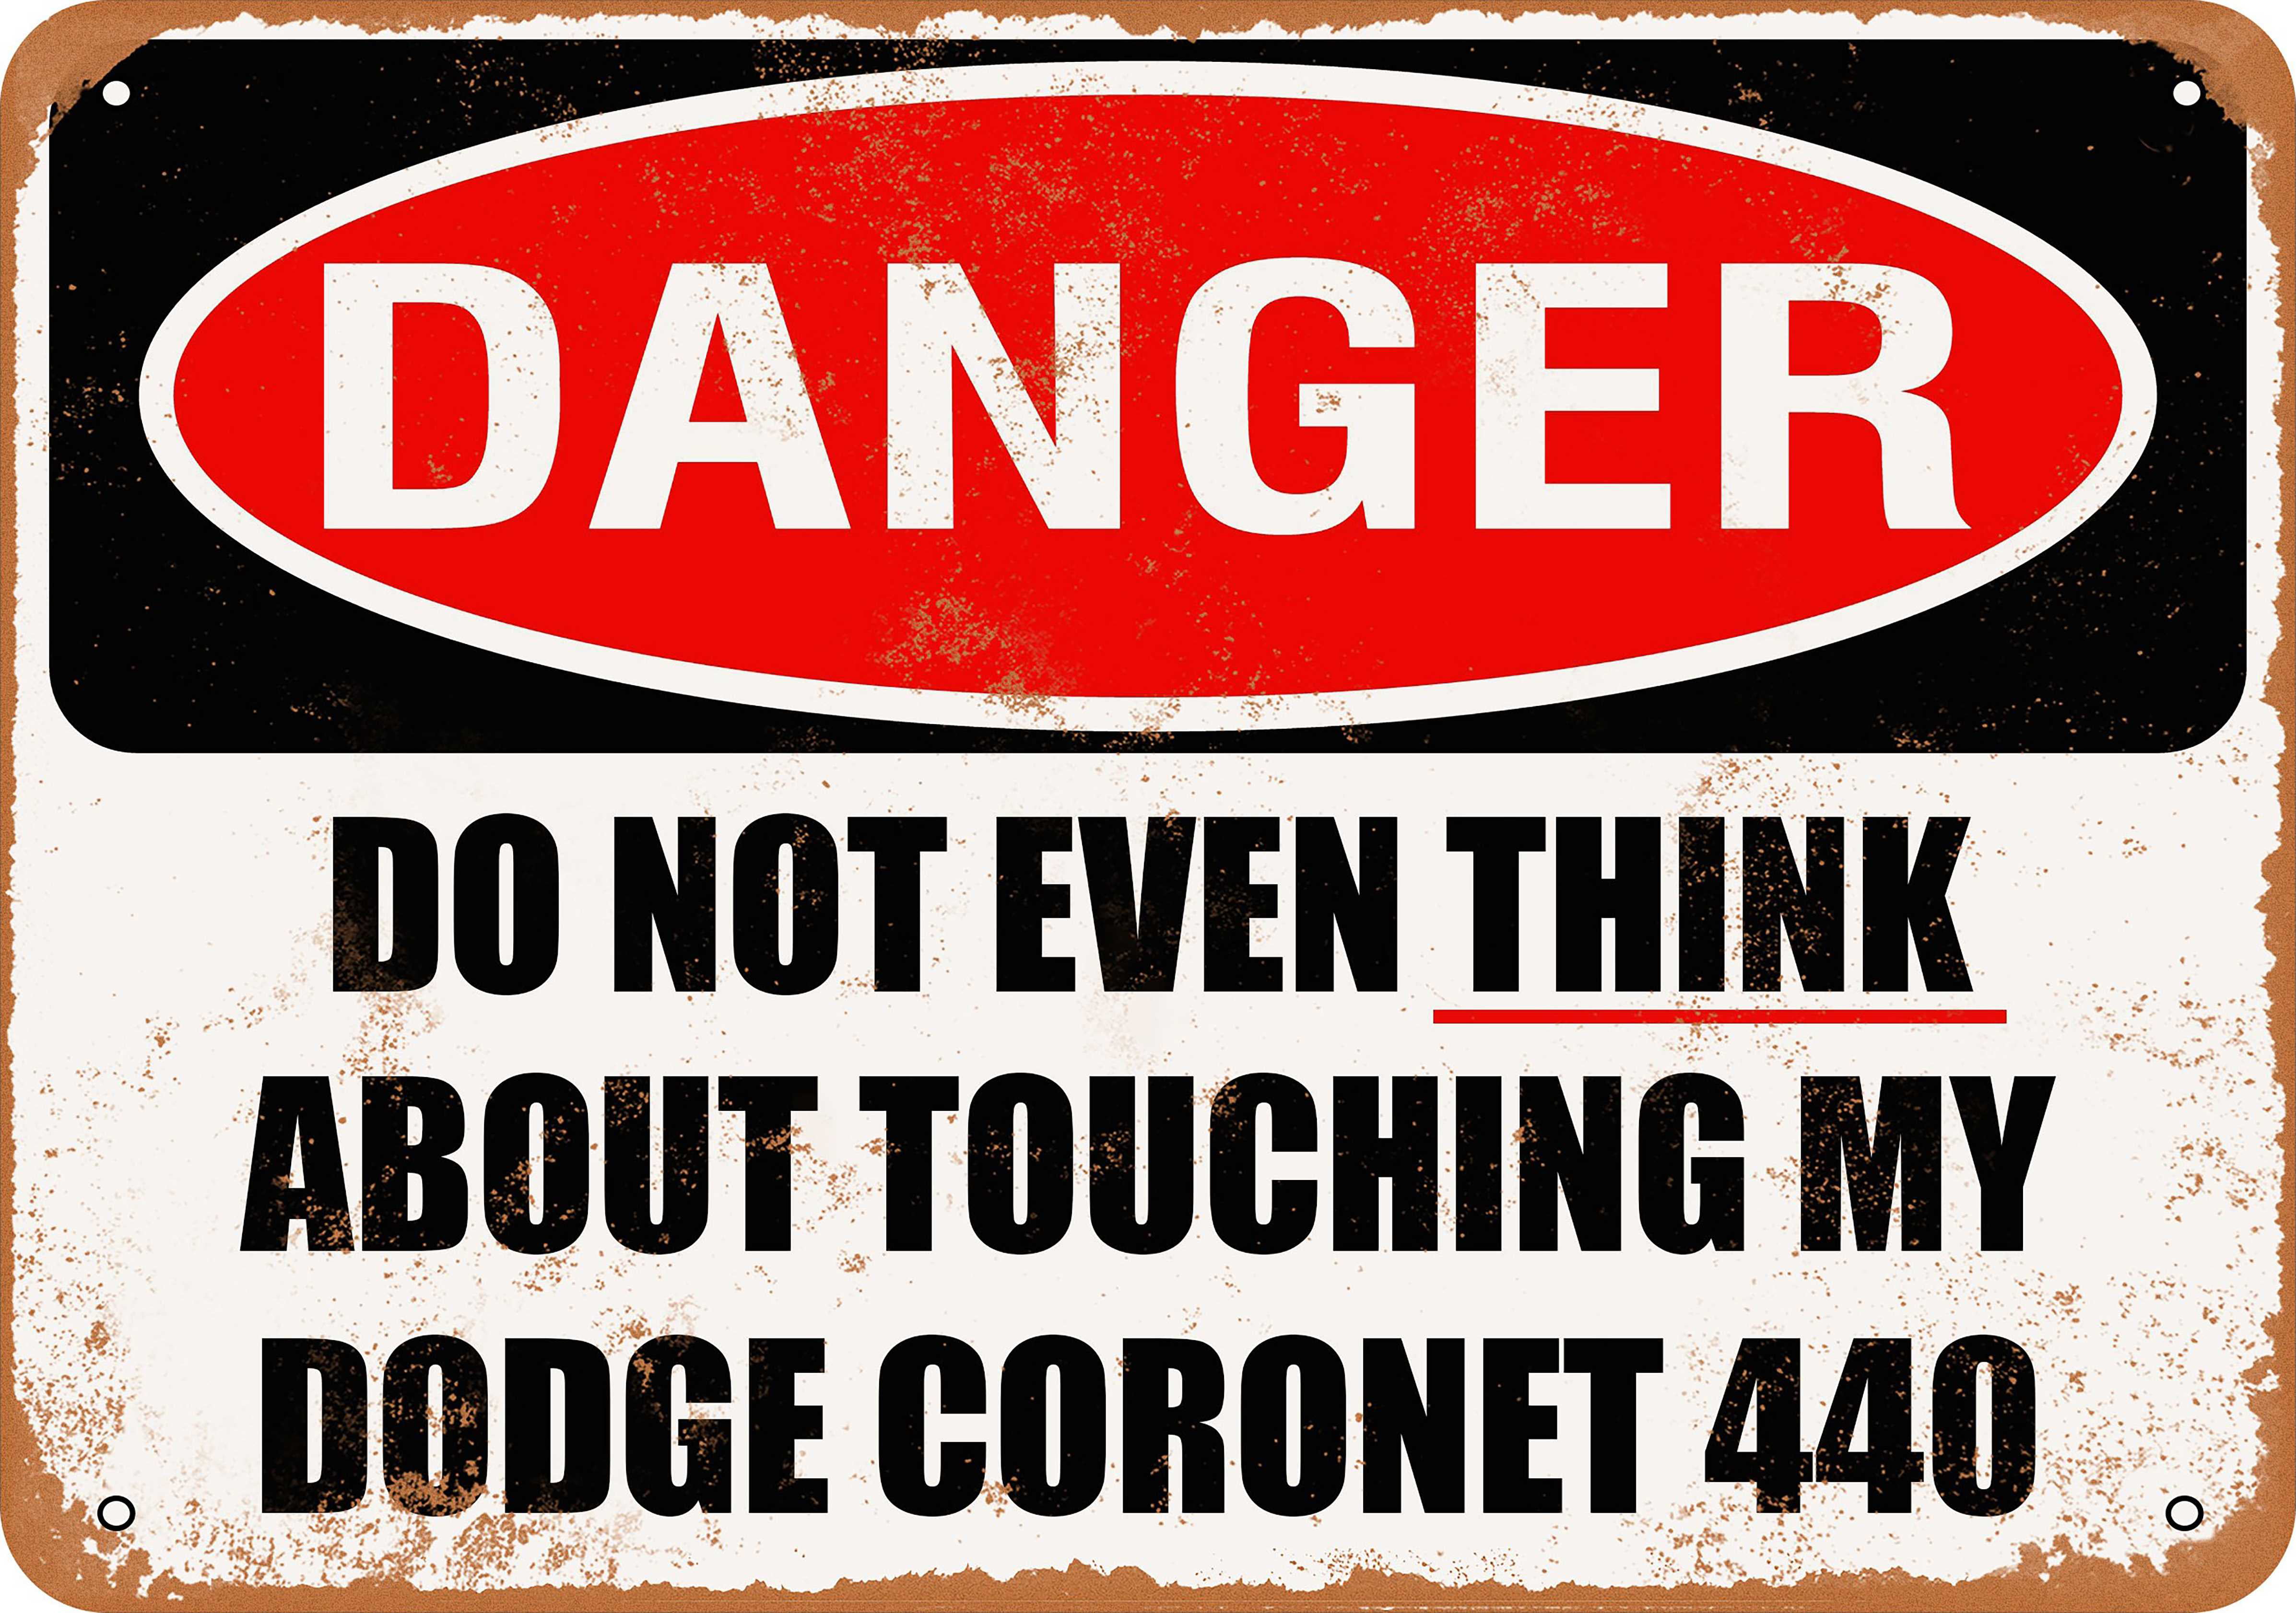 Vintage Look CORONET 440 PARKING ONLY Metal Sign